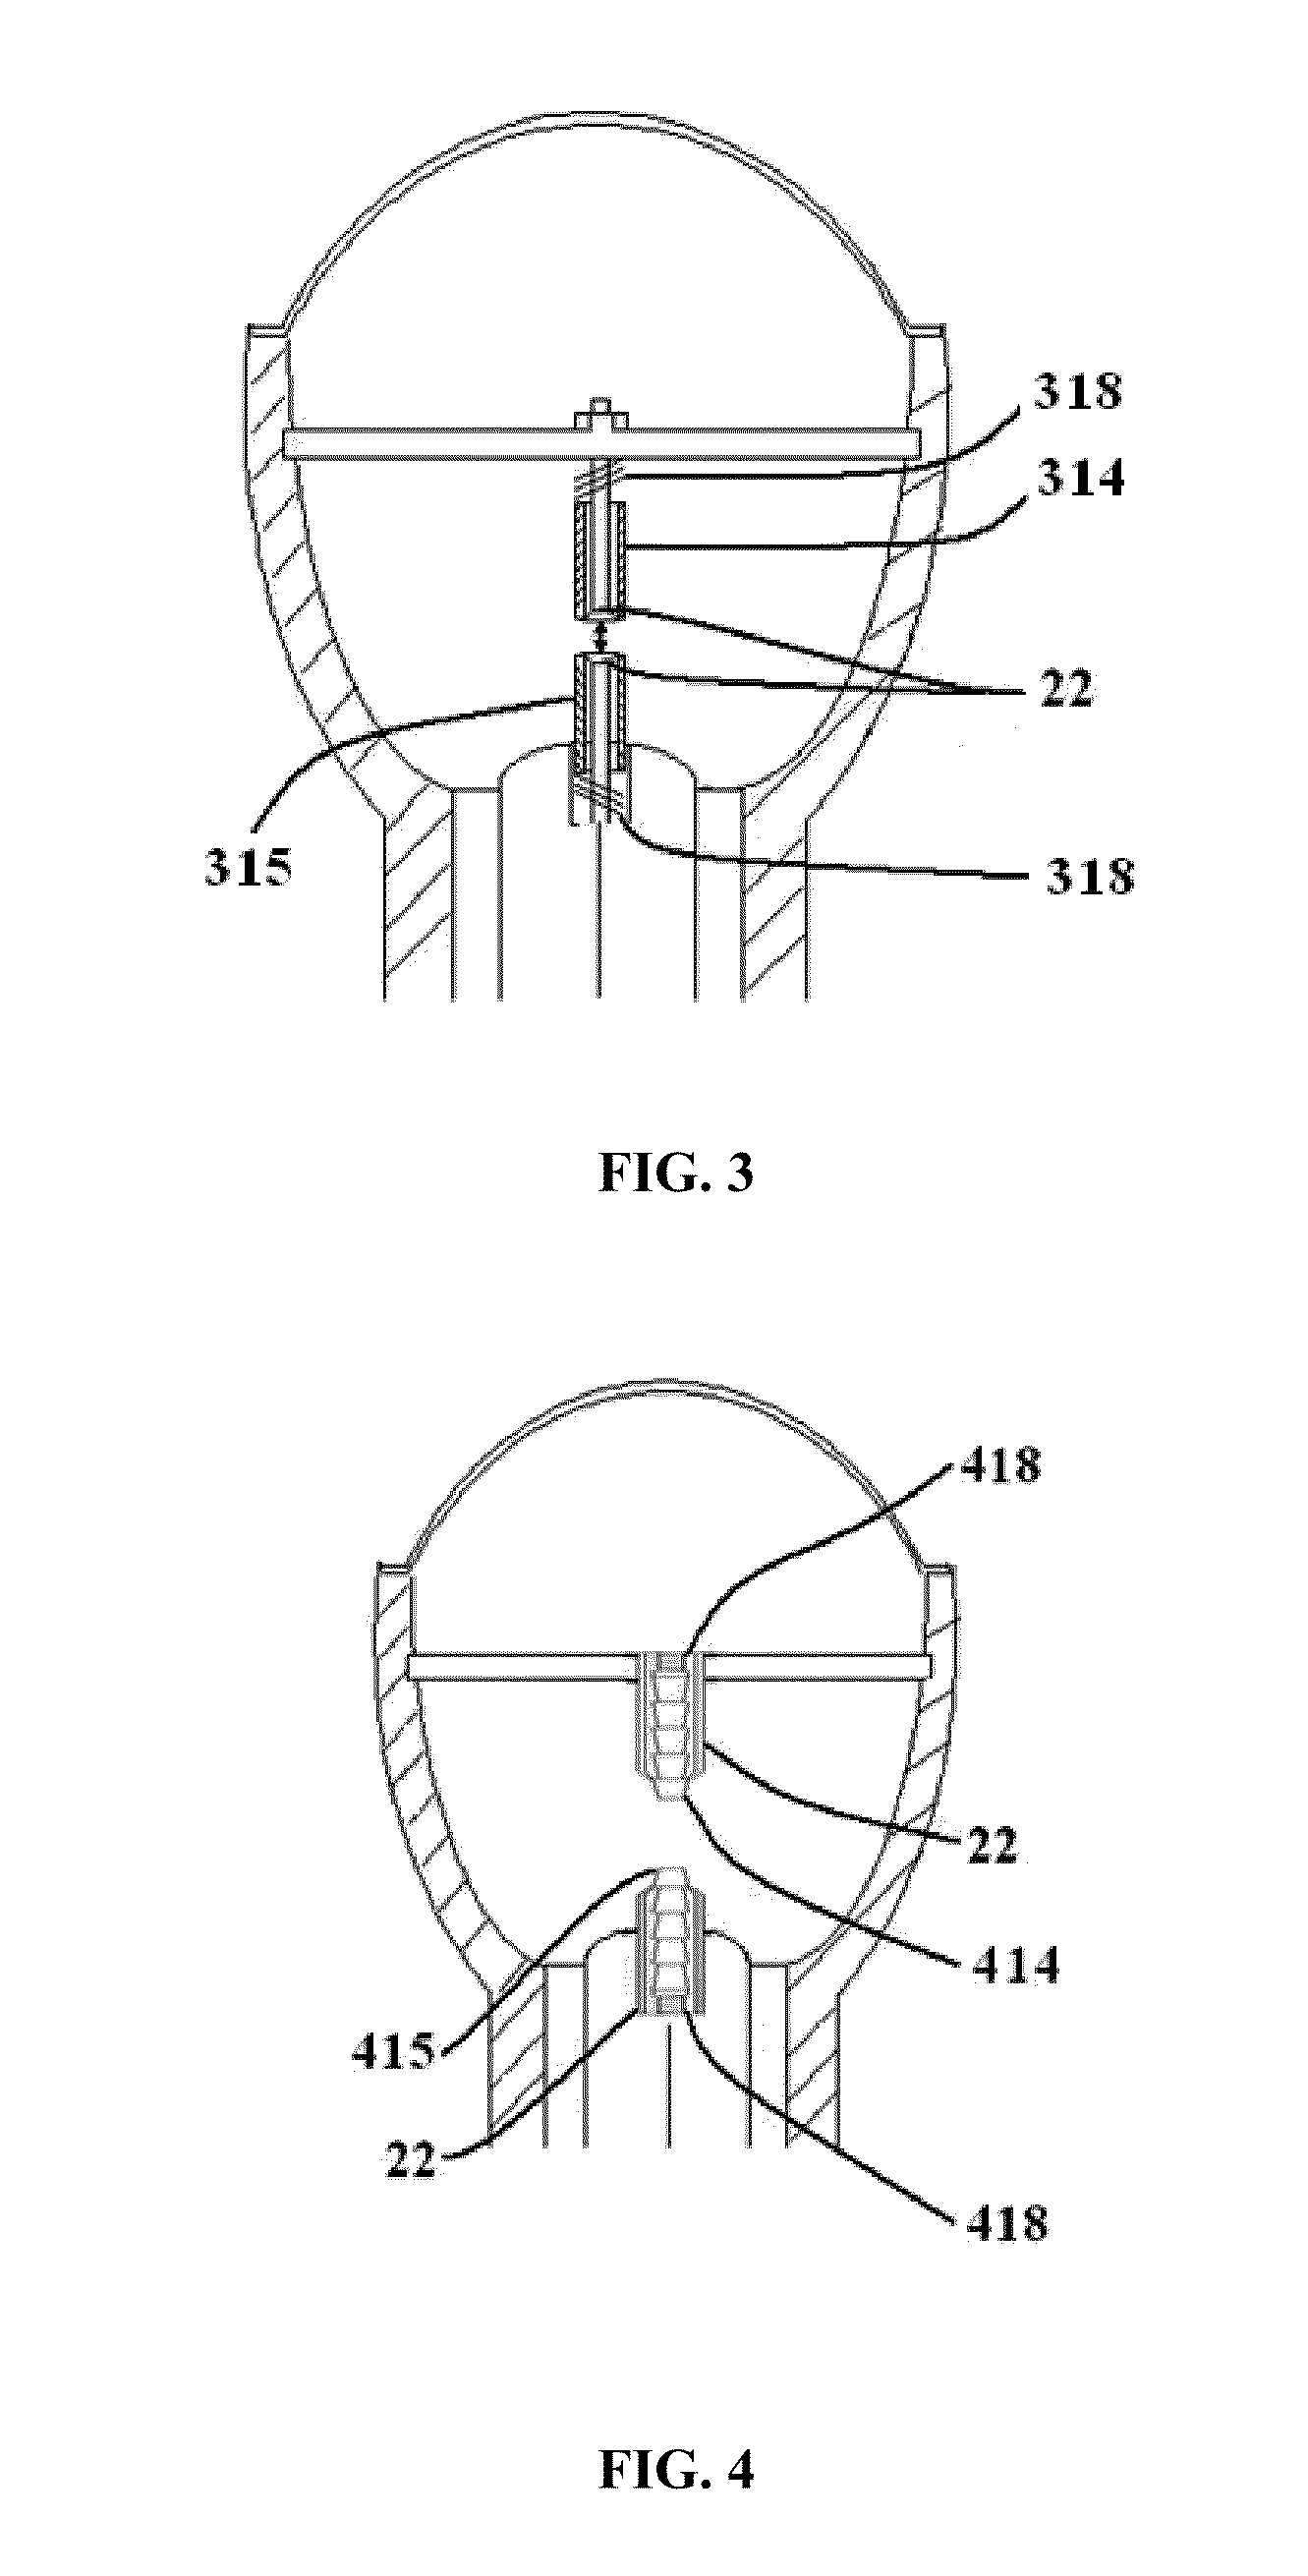 Methods to increase electrode life in devices used for extracorporeal shockwave therapy (ESWT)